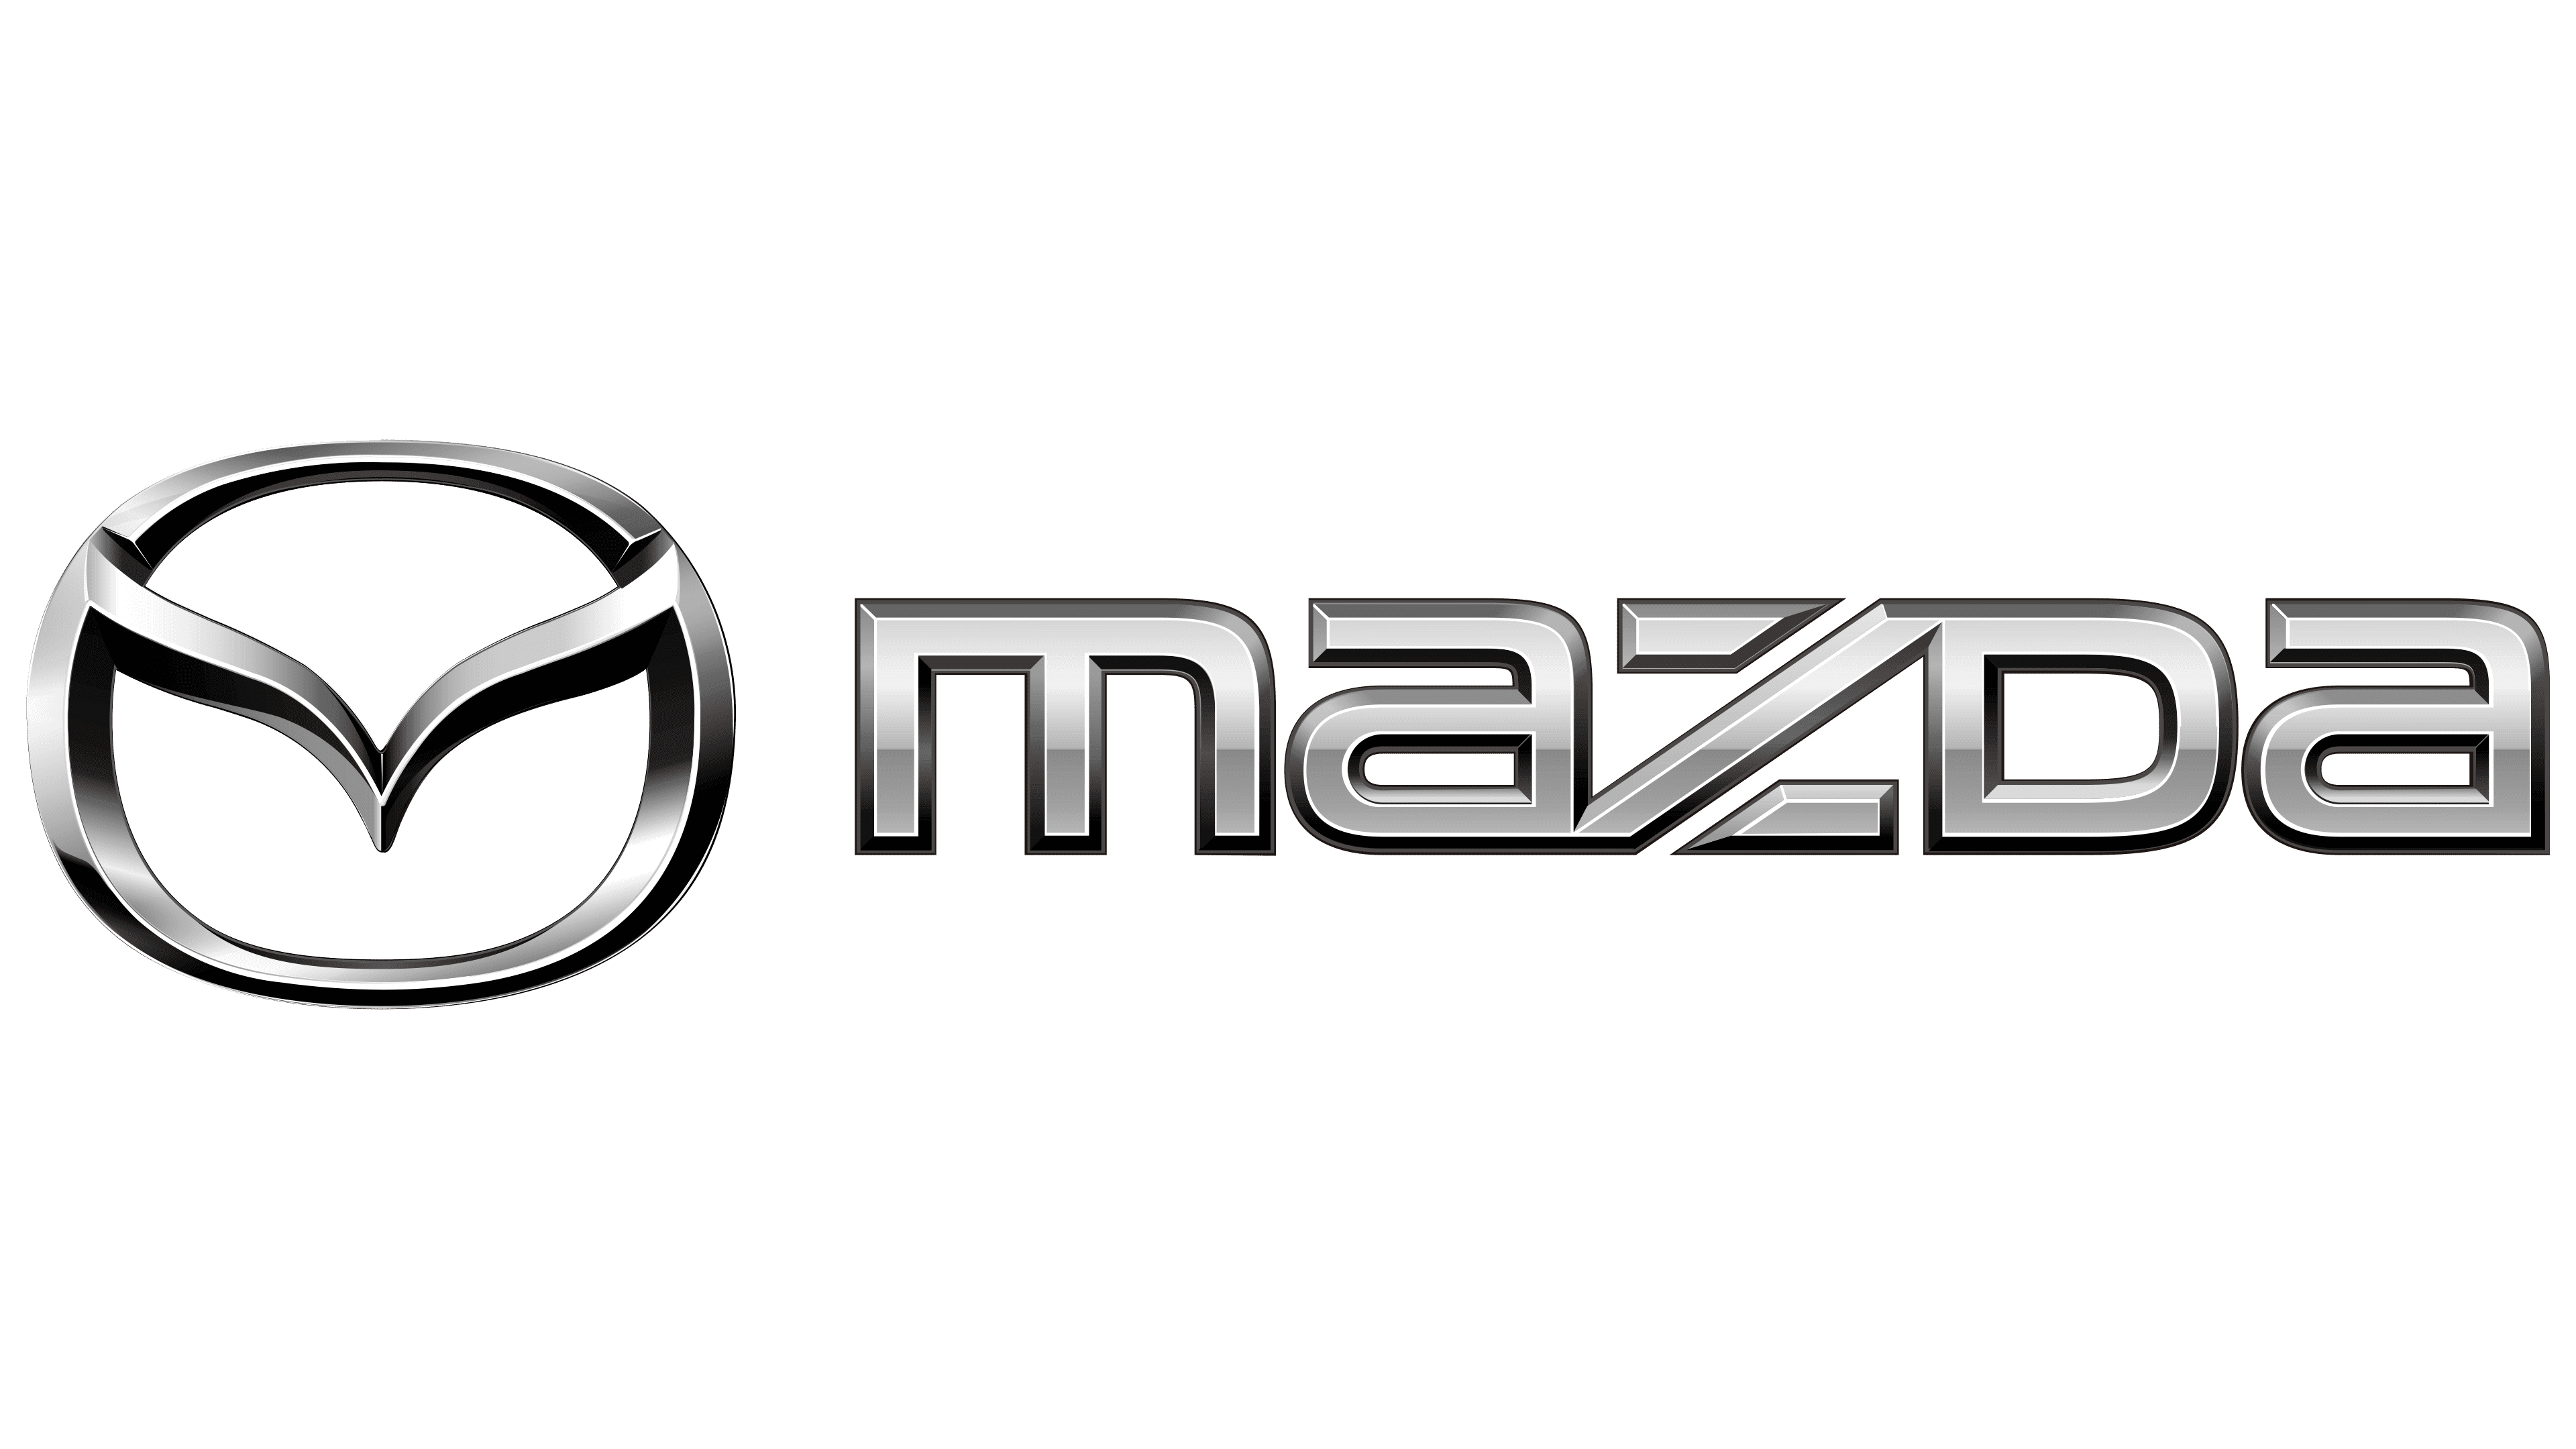 Mazda Logo and sign, new logo meaning and history, PNG, SVG